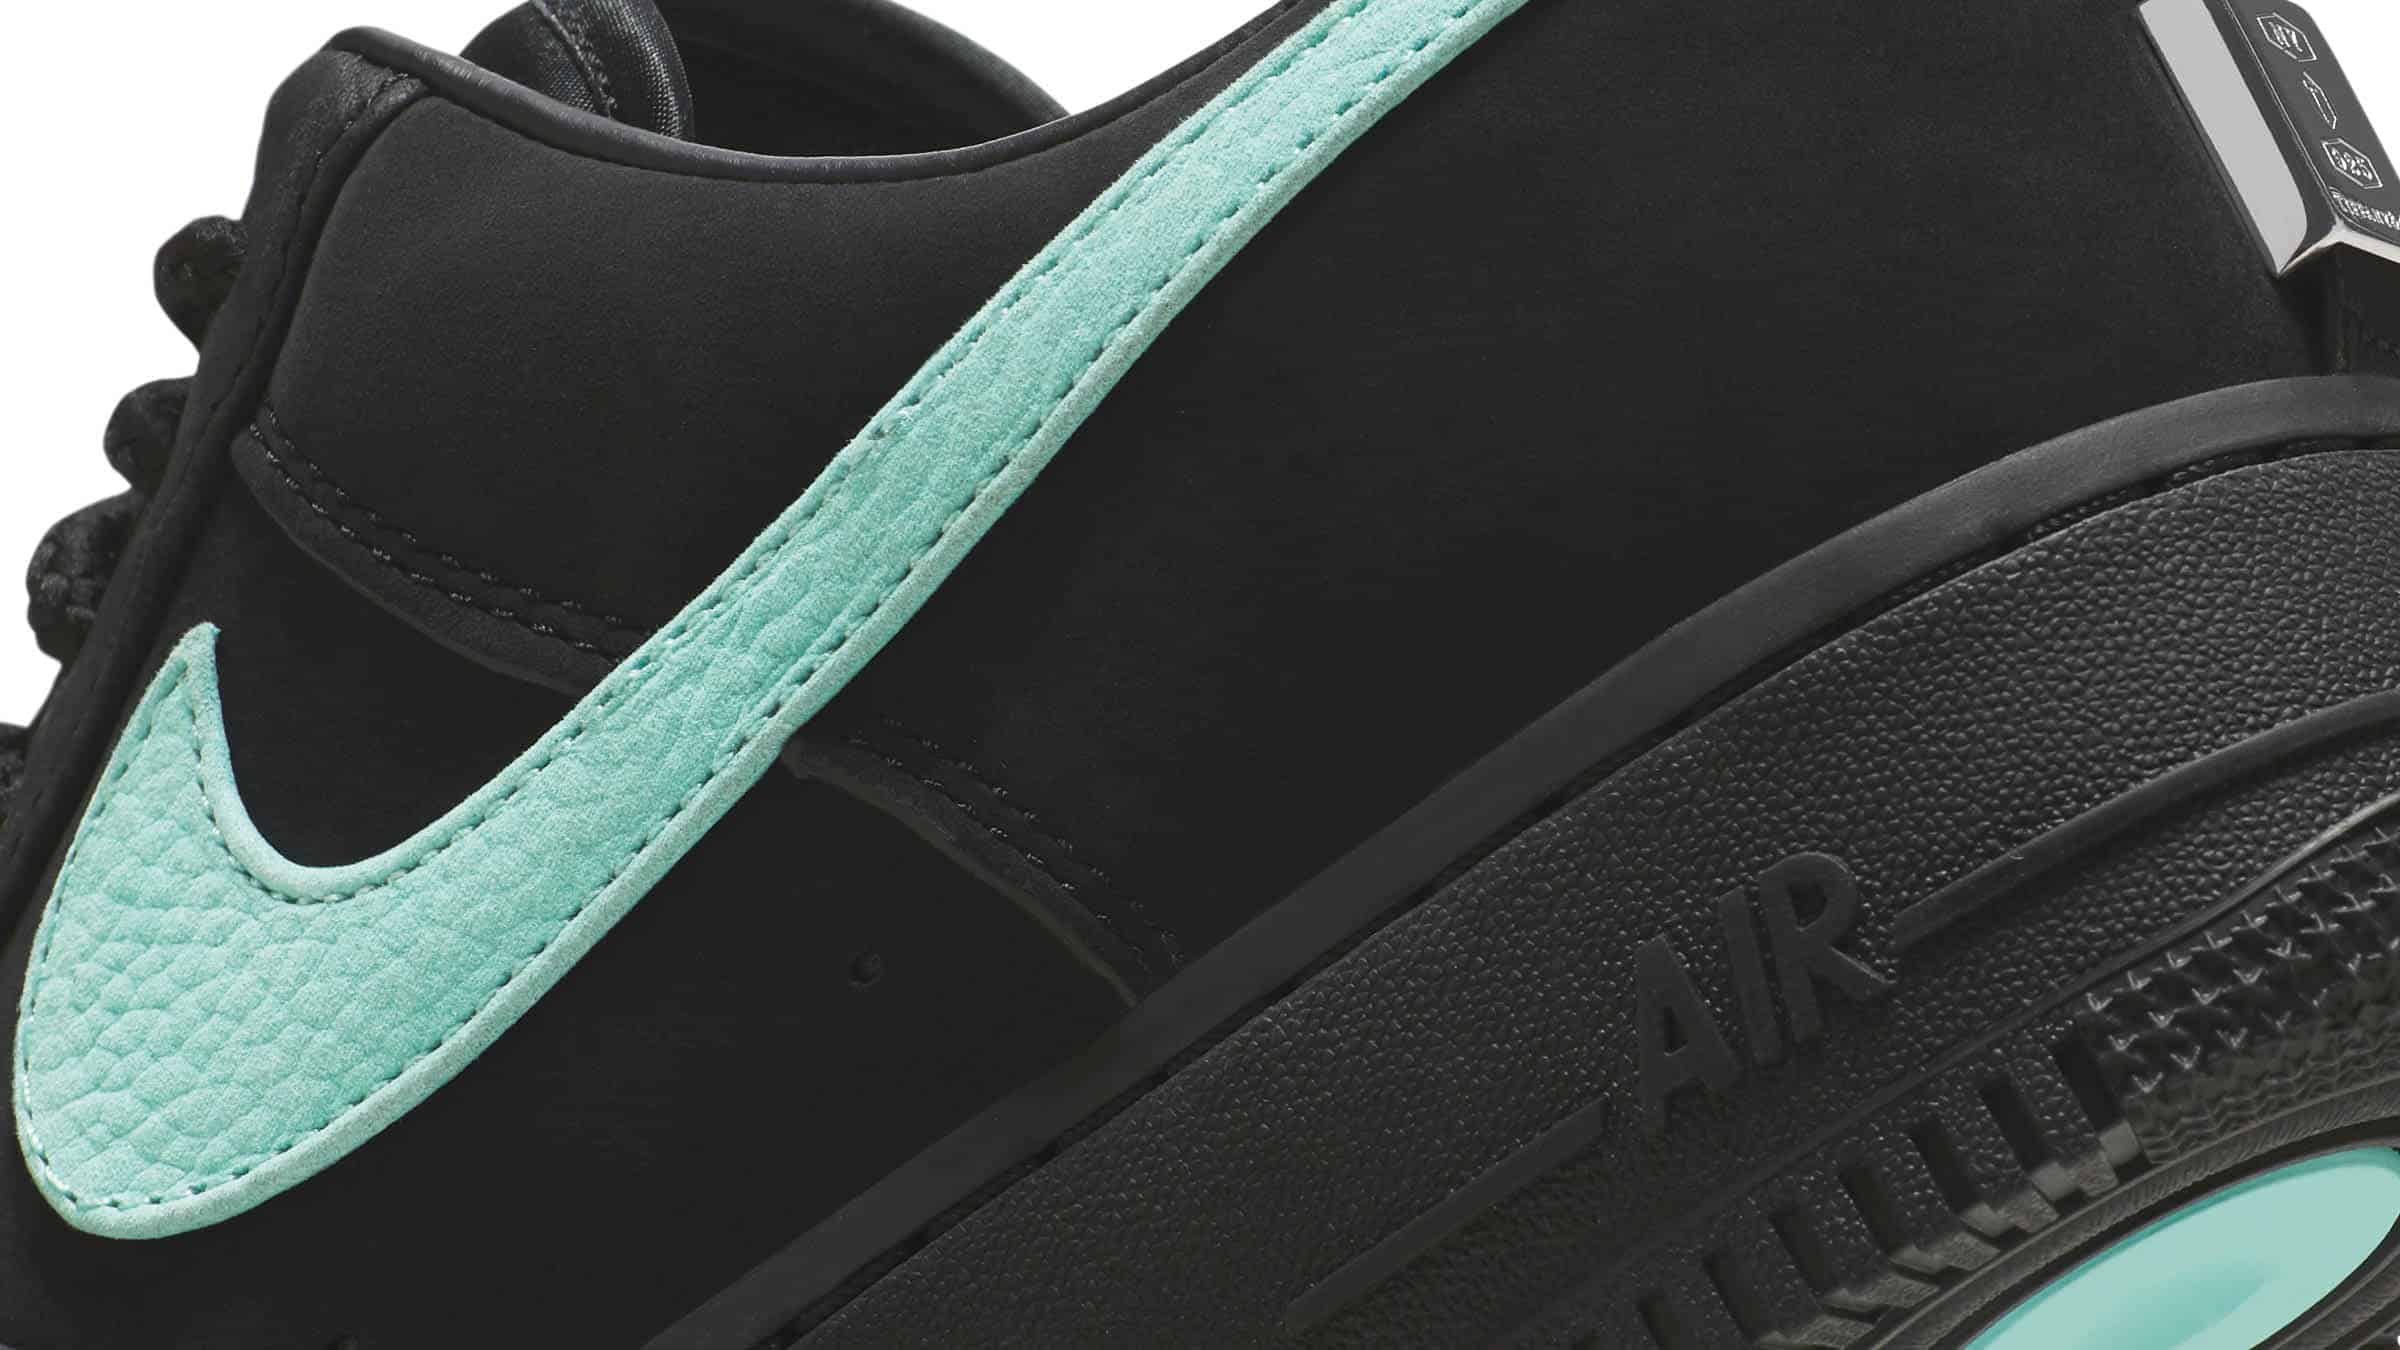 Tiffany & Co. x Nike collaboration divides social media, with some calling kicks 'hideous', others 'timely' | South China Morning Post